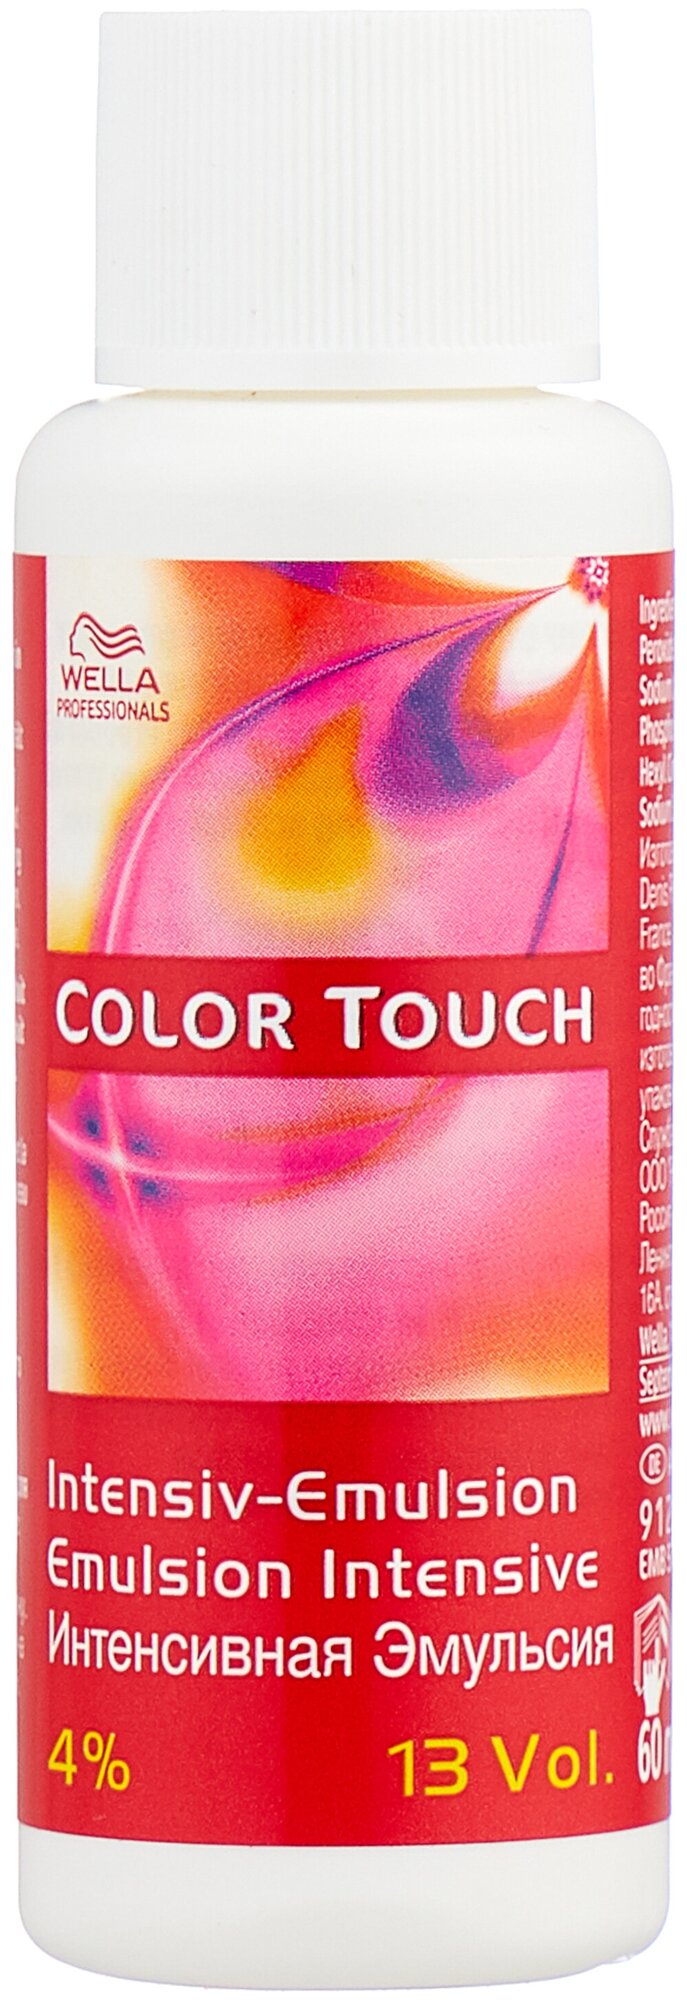 Wella Professionals Эмульсия Color Touch, 4%, 60 мл